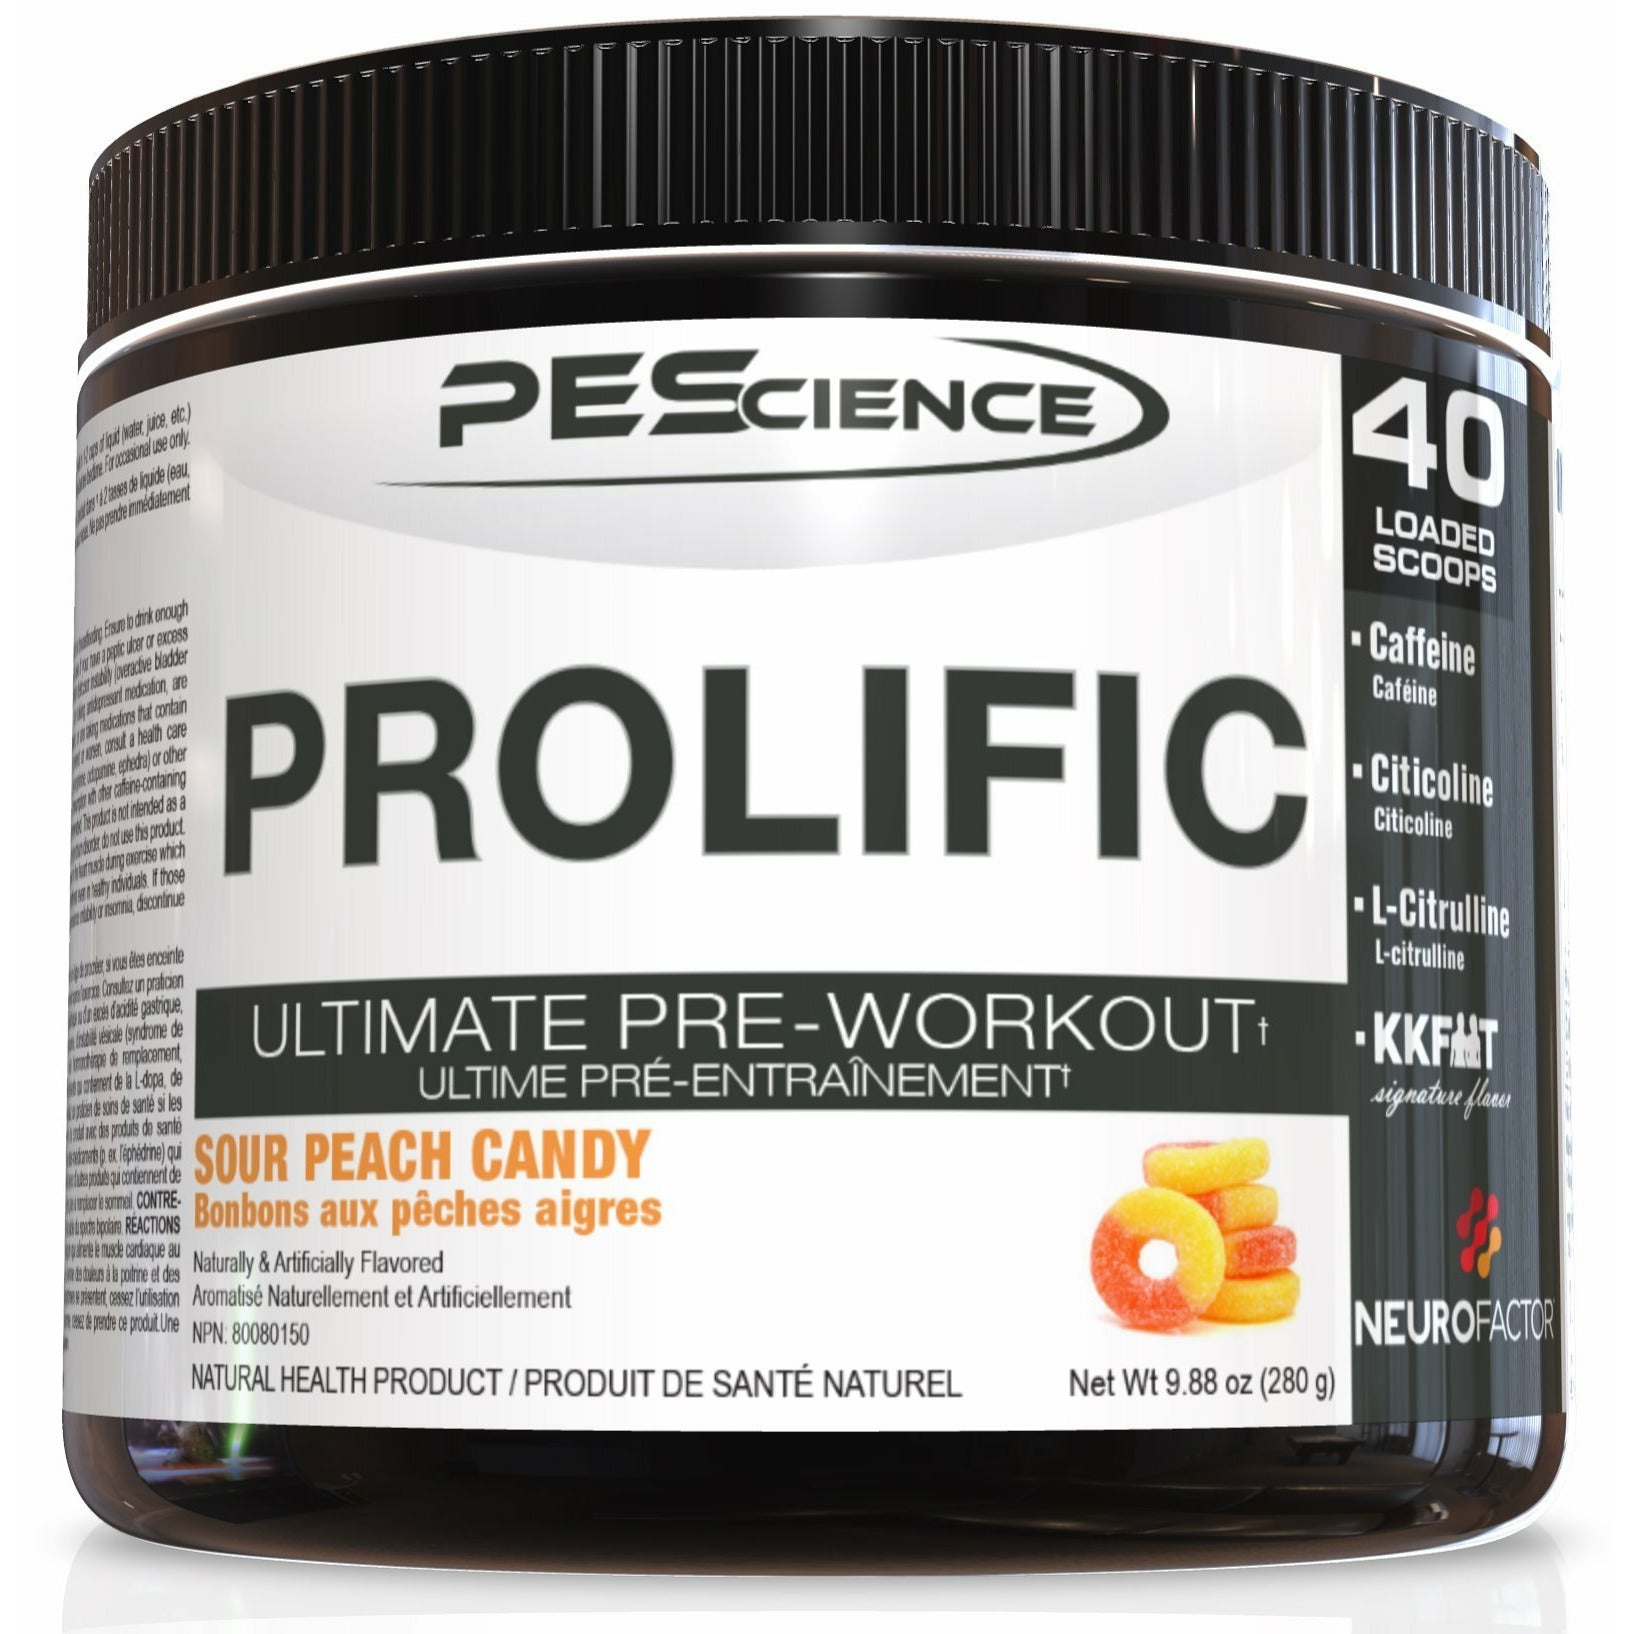 PEScience Prolific Pre-Workout (40 servings) Pre-workout Sour Peach Candy PEScience comming-soon-pescience-prolific-pre-workout-40-servings